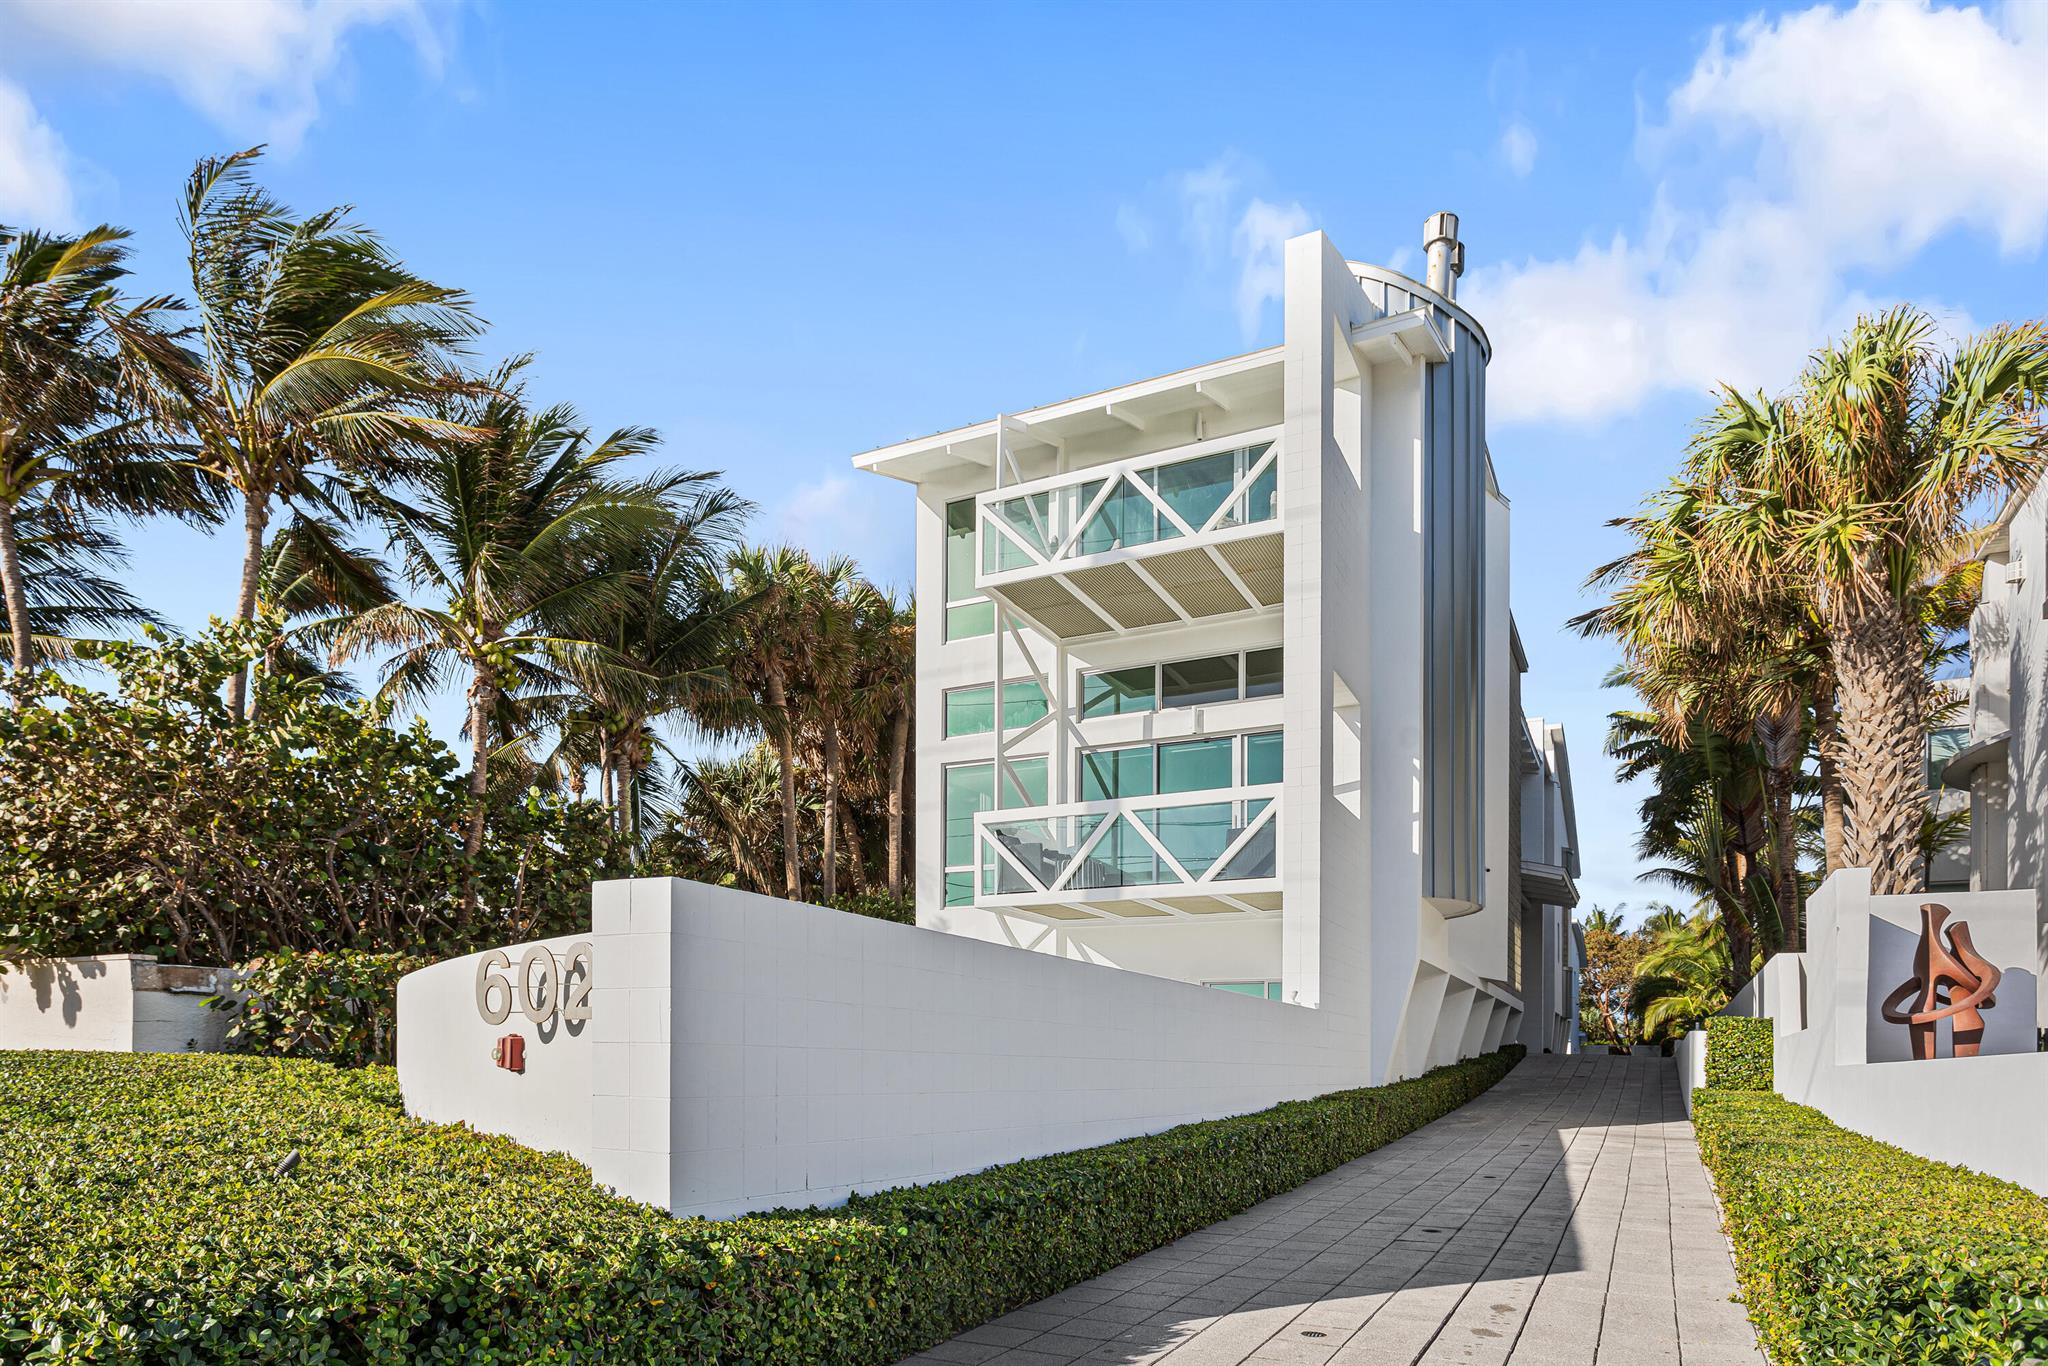 Architecturally brilliant and newly renovated, this ultra-luxurious tri-level residence combines panoramic ocean views with luxury, elegance and personal privacy. Details include a full-floor master suite, guesthouse, great room with sleek epicurean kitchen, media room with kitchenette and cabana bath, steel spiral staircases, elevator, and lap pool with water features. North Ocean Boulevard, Delray Beach, Florida. Historic Delray Beach is a beautifully preserved oceanfront community in the heart of South Florida's famed Gold Coast. Ensconced in an exclusive island-side enclave, this ultra-luxury residence is directly across the street from pristine ocean beachfront and within walking distance of the eclectic shops, cafes and restaurants that line vibrant Atlantic Avenue.

PROPERTY:
On a fenced quarter-acre, framed by specimen palms and manicured hedges, a brick motor court introduces this stunning contemporary estate delivering a distinct sense of place. In the newly landscaped backyard, covered and uncovered patios and the new outdoor kitchen offer ample spaces for entertaining. Custom-designed water elements include a covered heated lap pool flanked by a spa and a spillover waterfall, along with an outdoor shower, all recently updated.

RESIDENCE:
An architectural triumph that defines elegance, luxury and privacy, this artfully designed and recently renovated five-bedroom masterpiece, with 9197-¦ total square feet, encapsulates a striking industrial urban aesthetic with lyrical interior curves. Contrasting a dynamic, melodious fluidity and a sense of drama that surprise and delight from every vantage point, the three-story foyer and impressive glass-and-steel spiral staircase are crowned by a metal-clad ceiling. From the first-level, comprising a media room, with a kitchenette and cabana bath, and guest bedrooms with renovated ensuite bathrooms, the staircase ascends to the main floor. Showcasing a gas fireplace designed by Dominique Imbert, the chic great room opens to an oceanfront covered patio. Just adjacent, the formal dining area is served by a gourmet kitchen with glass-faced cabinetry and professional-grade stainless appliances. A hallway with glass-shelved built-in cabinetry is a prelude to the voluminous library, the steel spiral staircase to the third-floor, and an outdoor walkway to the private guesthouse with a sitting room and ensuite bedroom. A luxurious sanctuary, the magnificent primary suite occupies the entire third level. The expansive bedroom, with a sitting area is enhanced by a gas fireplace, a metal pitched ceiling, and aluminum shuttered sliding doors that access the oceanfront balcony. The suite comprises custom-fitted walk-in closets and a celadon-tiled bathroom with a black-accented dual-sink vanity, jetted spa tub and walk-in shower. Completing the layout are a laundry, industrial-style elevator with new technology, and  an airconditioned two-bay garage. New amenities include a full-house generator, security and camera systems, outdoor speakers, hurricane-rated glass, motorized shades, and two air-conditioning units, with all six equipped with expensive UV light purifiers and electric static air filters to insure the cleanest possible air throughout the home. With the serenity of seemingly endless ocean views and immediate entr+¬e to the beach, this ultra-contemporary residence and guesthouse embody the energy and ambiance so essential to an exceptional South Florida lifestyle. The creative use of spaces topped by volume ceilings, open galleries, an atrium, window-walls of glass, designer fireplaces, new wood and porcelain flooring, decorator-curated lighting and fiber-optic exterior lighting maximize the estate's emotional impact.

The information herein is deemed reliable and subject to errors, omissions or changes without notice.  The information has been derived from architectural plans or county records. Buyer should verify all measurements.

DISCLAIMER: Information published or otherwise provided by the listing company and its representatives including but not limited to prices, measurements, square footages, lot sizes, calculations, statistics, and videos are deemed reliable but are not guaranteed and are subject to errors, omissions or changes without notice. All such information should be independently verified by any prospective purchaser or seller. Parties should perform their own due diligence to verify such information prior to a sale or listing. Listing company expressly disclaims any warranty or representation regarding such information. Prices published are either list price, sold price, and/or last asking price. The listing company participates in the Multiple Listing Service and IDX. The properties published as listed and sold are not necessarily exclusive to listing company and may be listed or have sold with other members of the Multiple Listing Service. Transactions where listing company represented both buyers and sellers are calculated as two sales. The listing company's marketplace is all of the following: Vero Beach, Town of Orchid, Indian River Shores, Town of Palm Beach, West Palm Beach, Manalapan Beach, Point Manalapan, Hypoluxo Island, Ocean Ridge, Gulf Stream, Delray Beach, Highland Beach, Boca Raton, East Deerfield Beach, Hillsboro Beach, Hillsboro Shores, East Pompano Beach, Lighthouse Point, Sea Ranch Lakes and Fort Lauderdale. Cooperating brokers are advised that in the event of a Buyer default, no financial fee will be paid to a cooperating Broker on the Deposits retained by the Seller. No financial fees will be paid to any cooperating broker until title passes or upon actual commencement of a lease. Some affiliations may not be applicable to certain geographic areas. If your property is currently listed with another broker, please disregard any solicitation for services. Copyright 2022 by the listing company. All Rights Reserved.